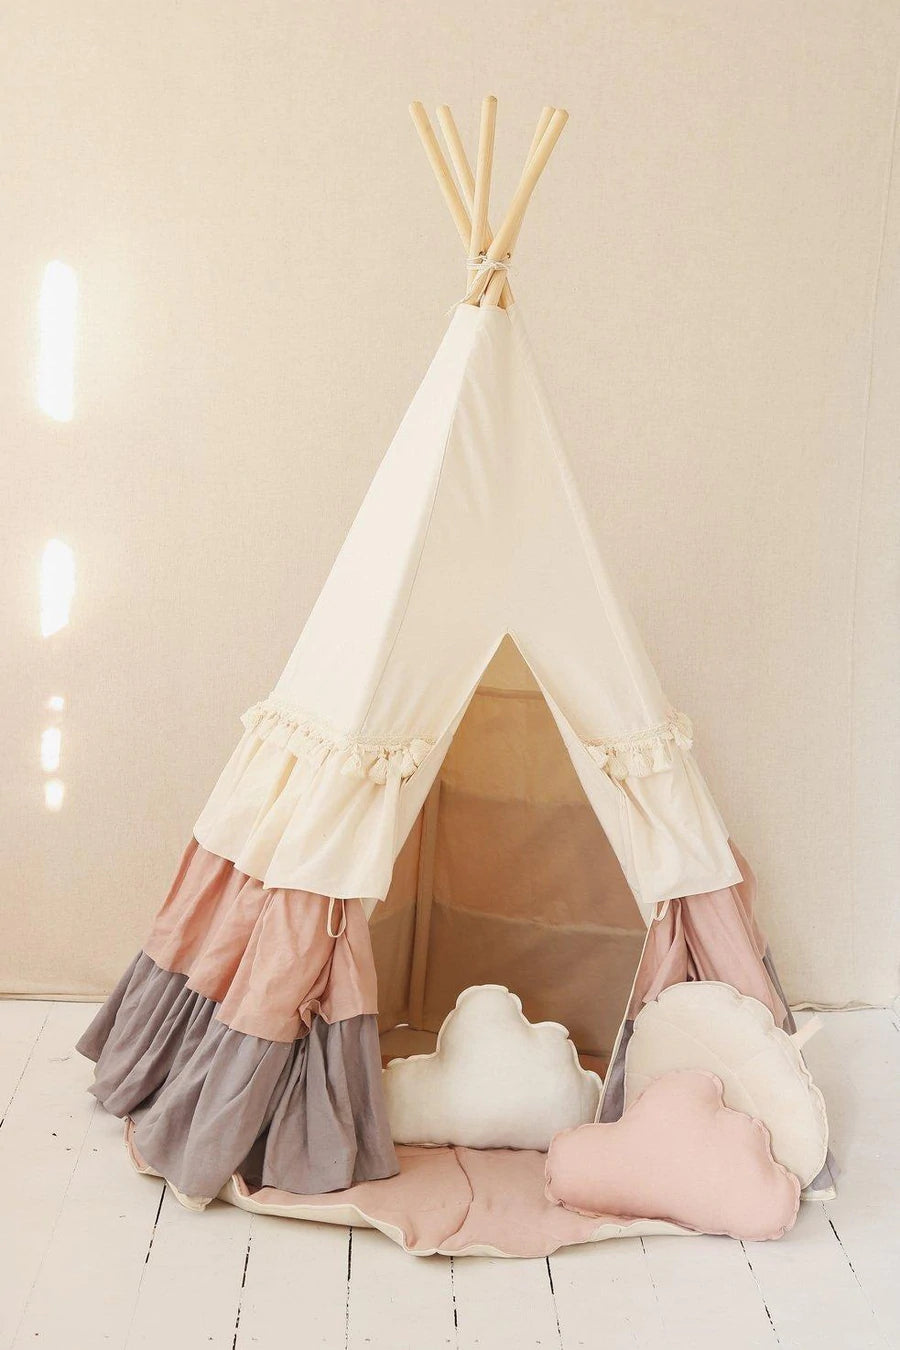 Powder Frills Teepee Tent with Frills -IN STORE PICK UP ONLY